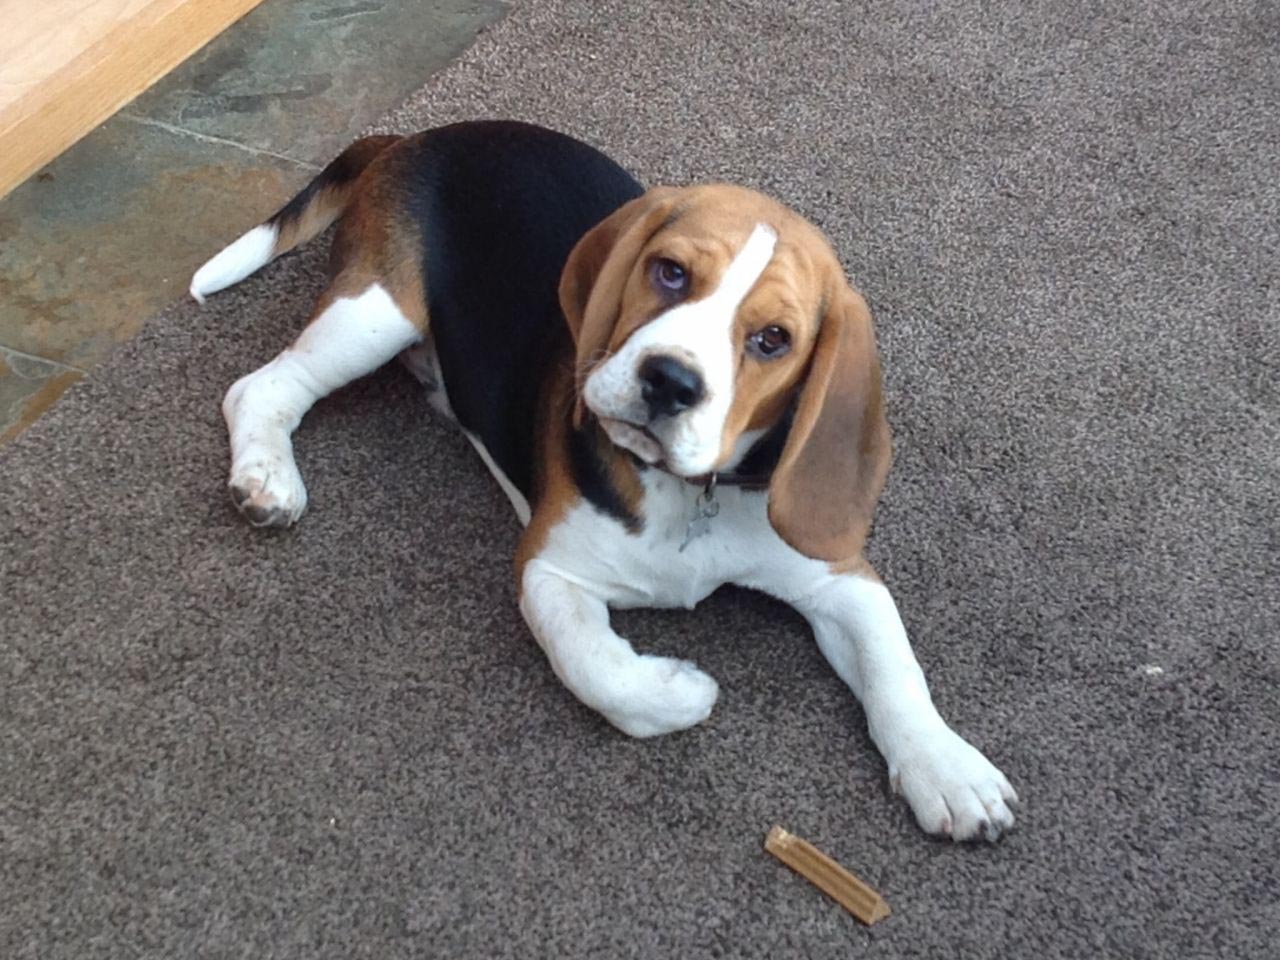 How Much Does a Beagle Weight at 3 Months